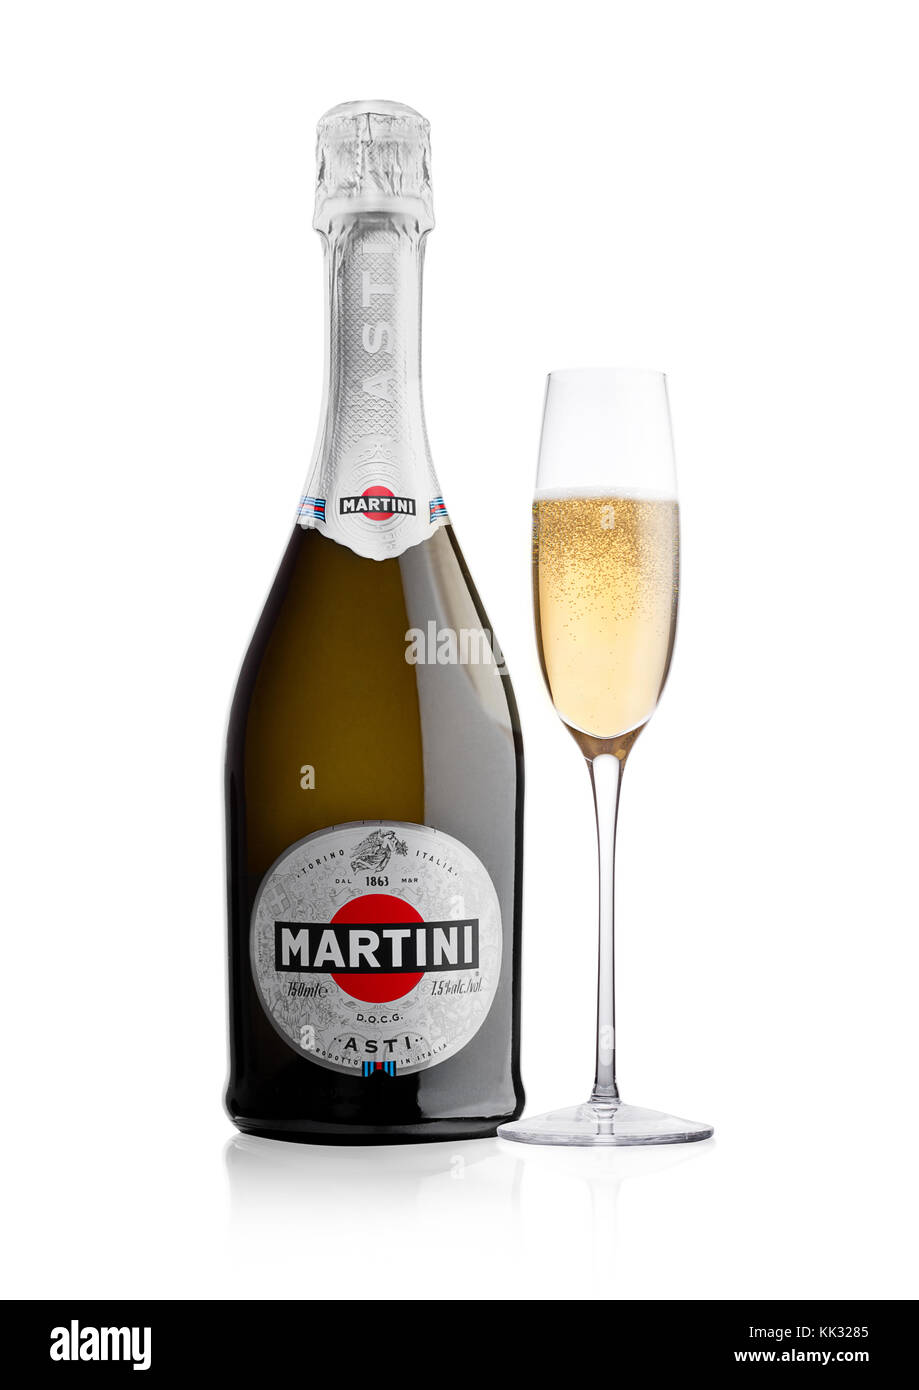 LONDON, UK - November 24, 2017: Bottle and glass of sparkling wine Martini Asti on white background. Produced in Italy Stock Photo